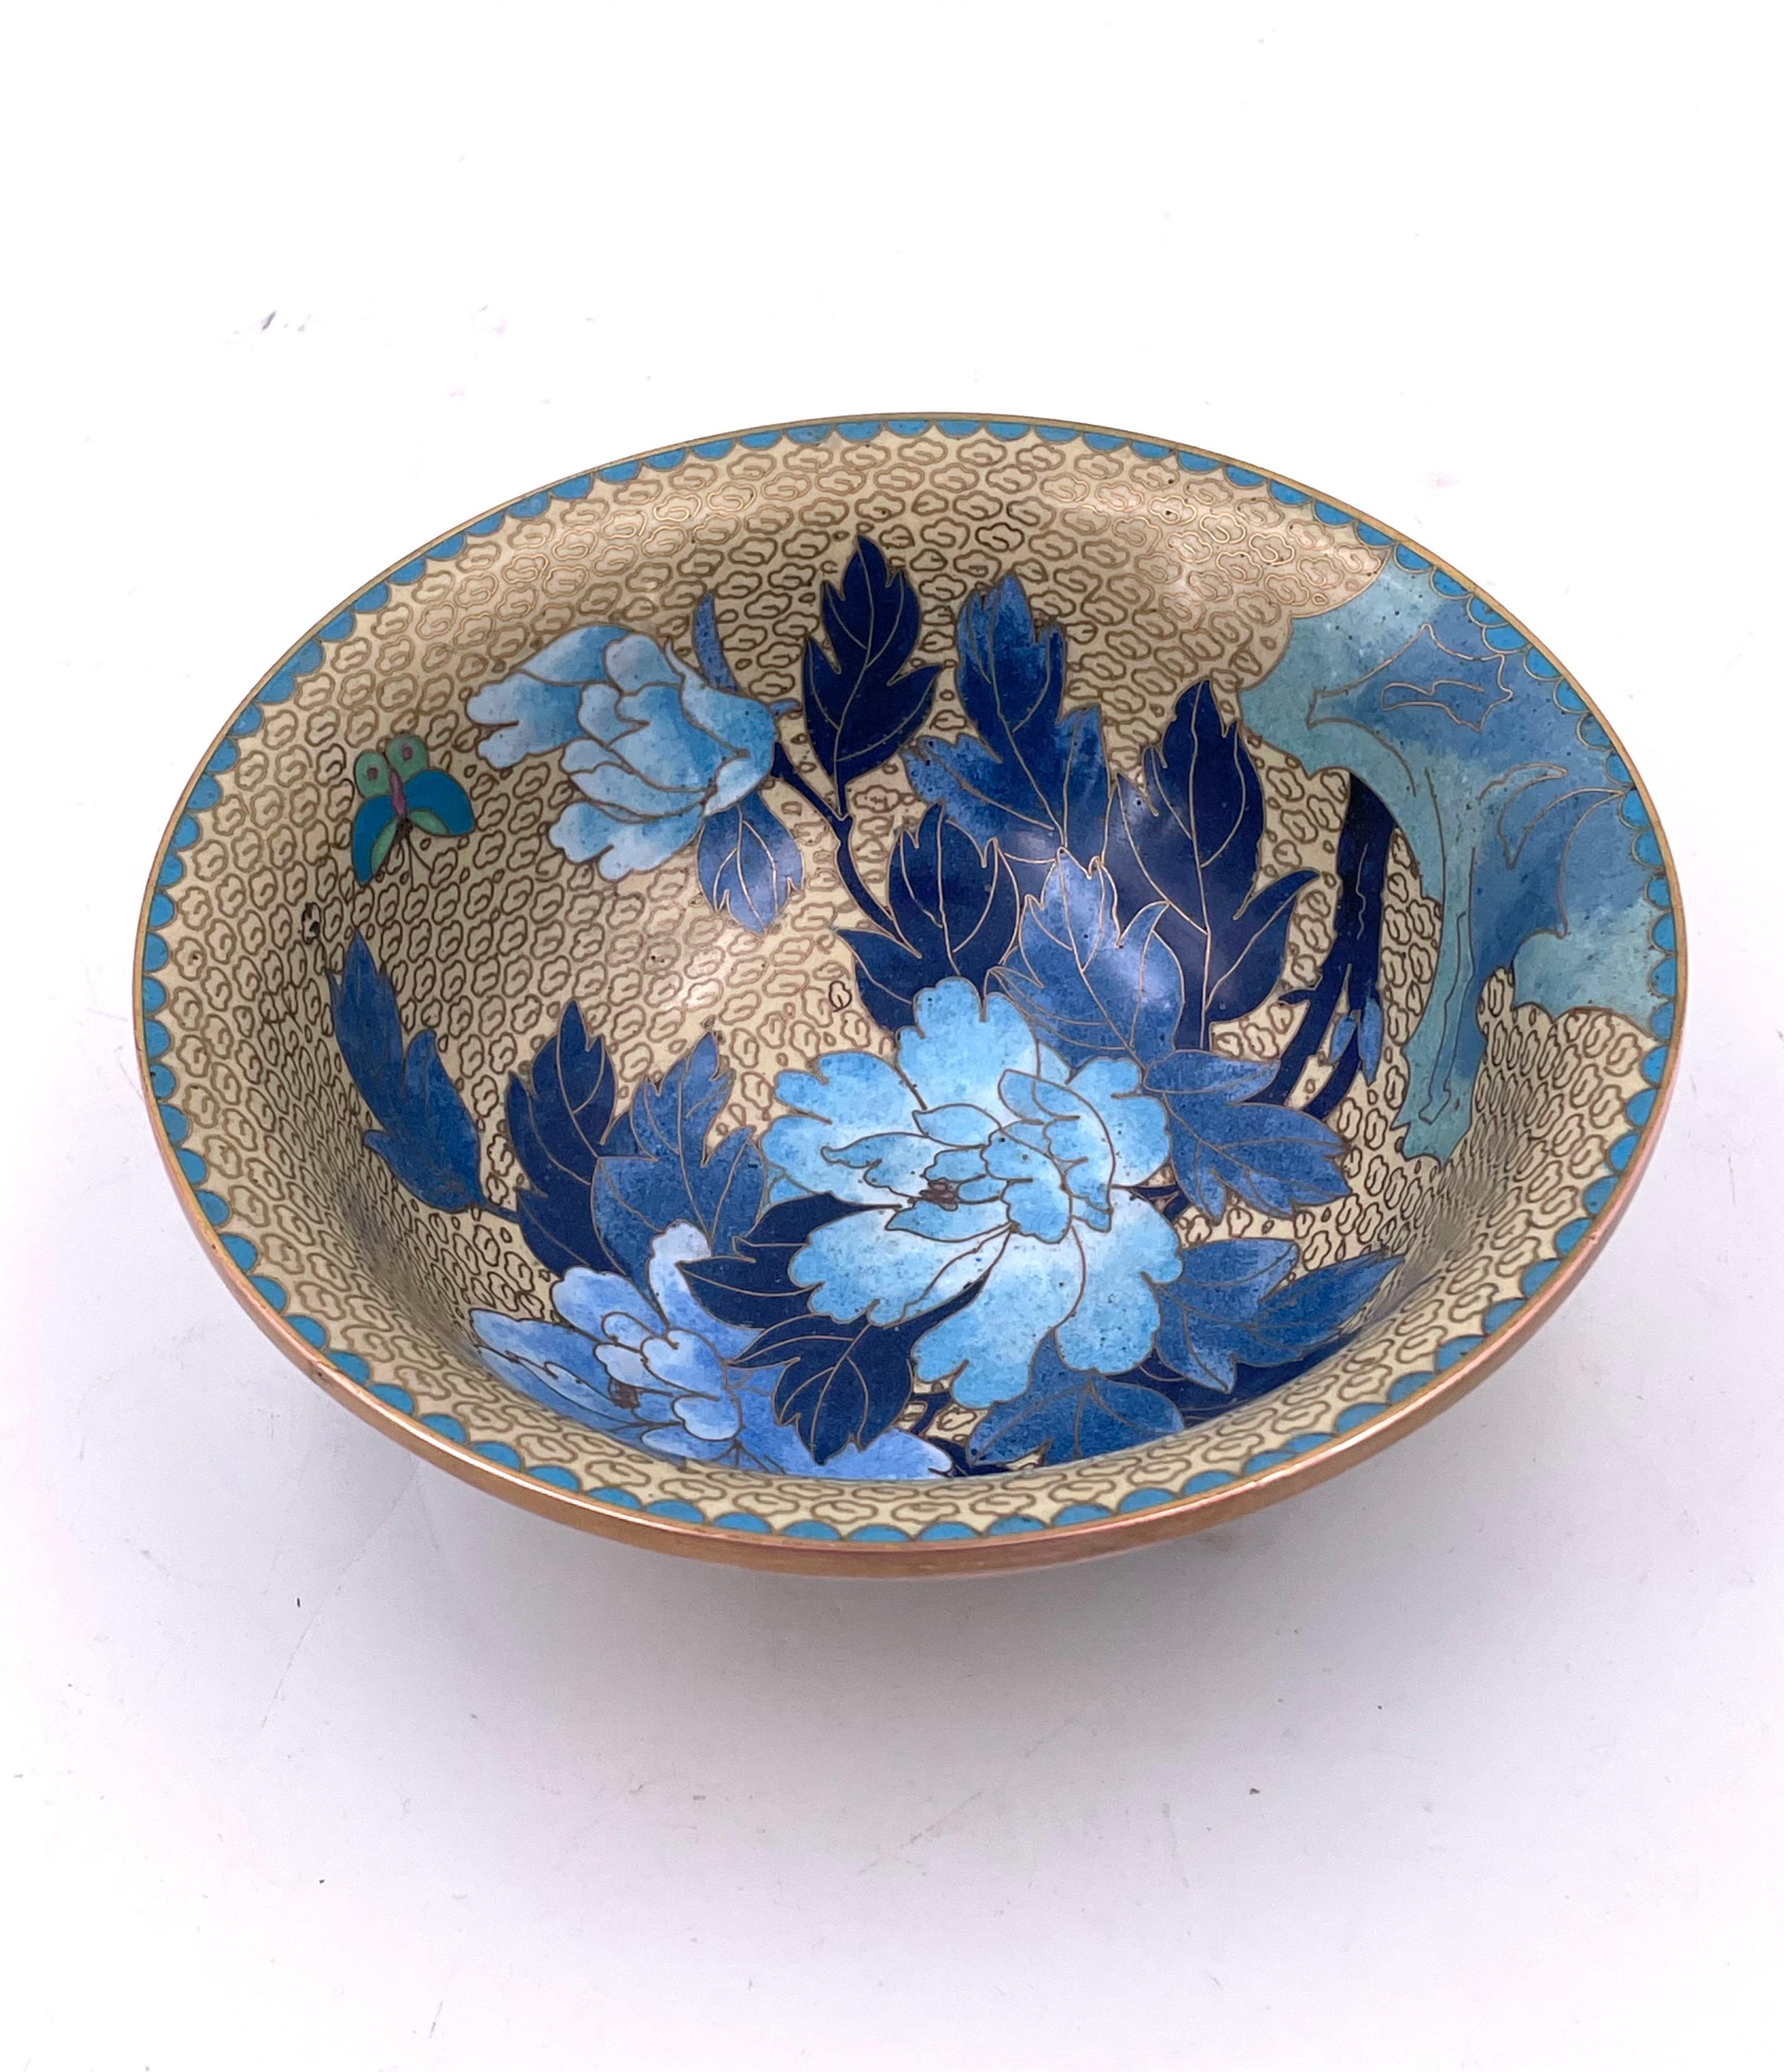 Gorgeous, Chinese cloisonné bowl in blue with a very nice floral butterfly pattern. Excellent condition.